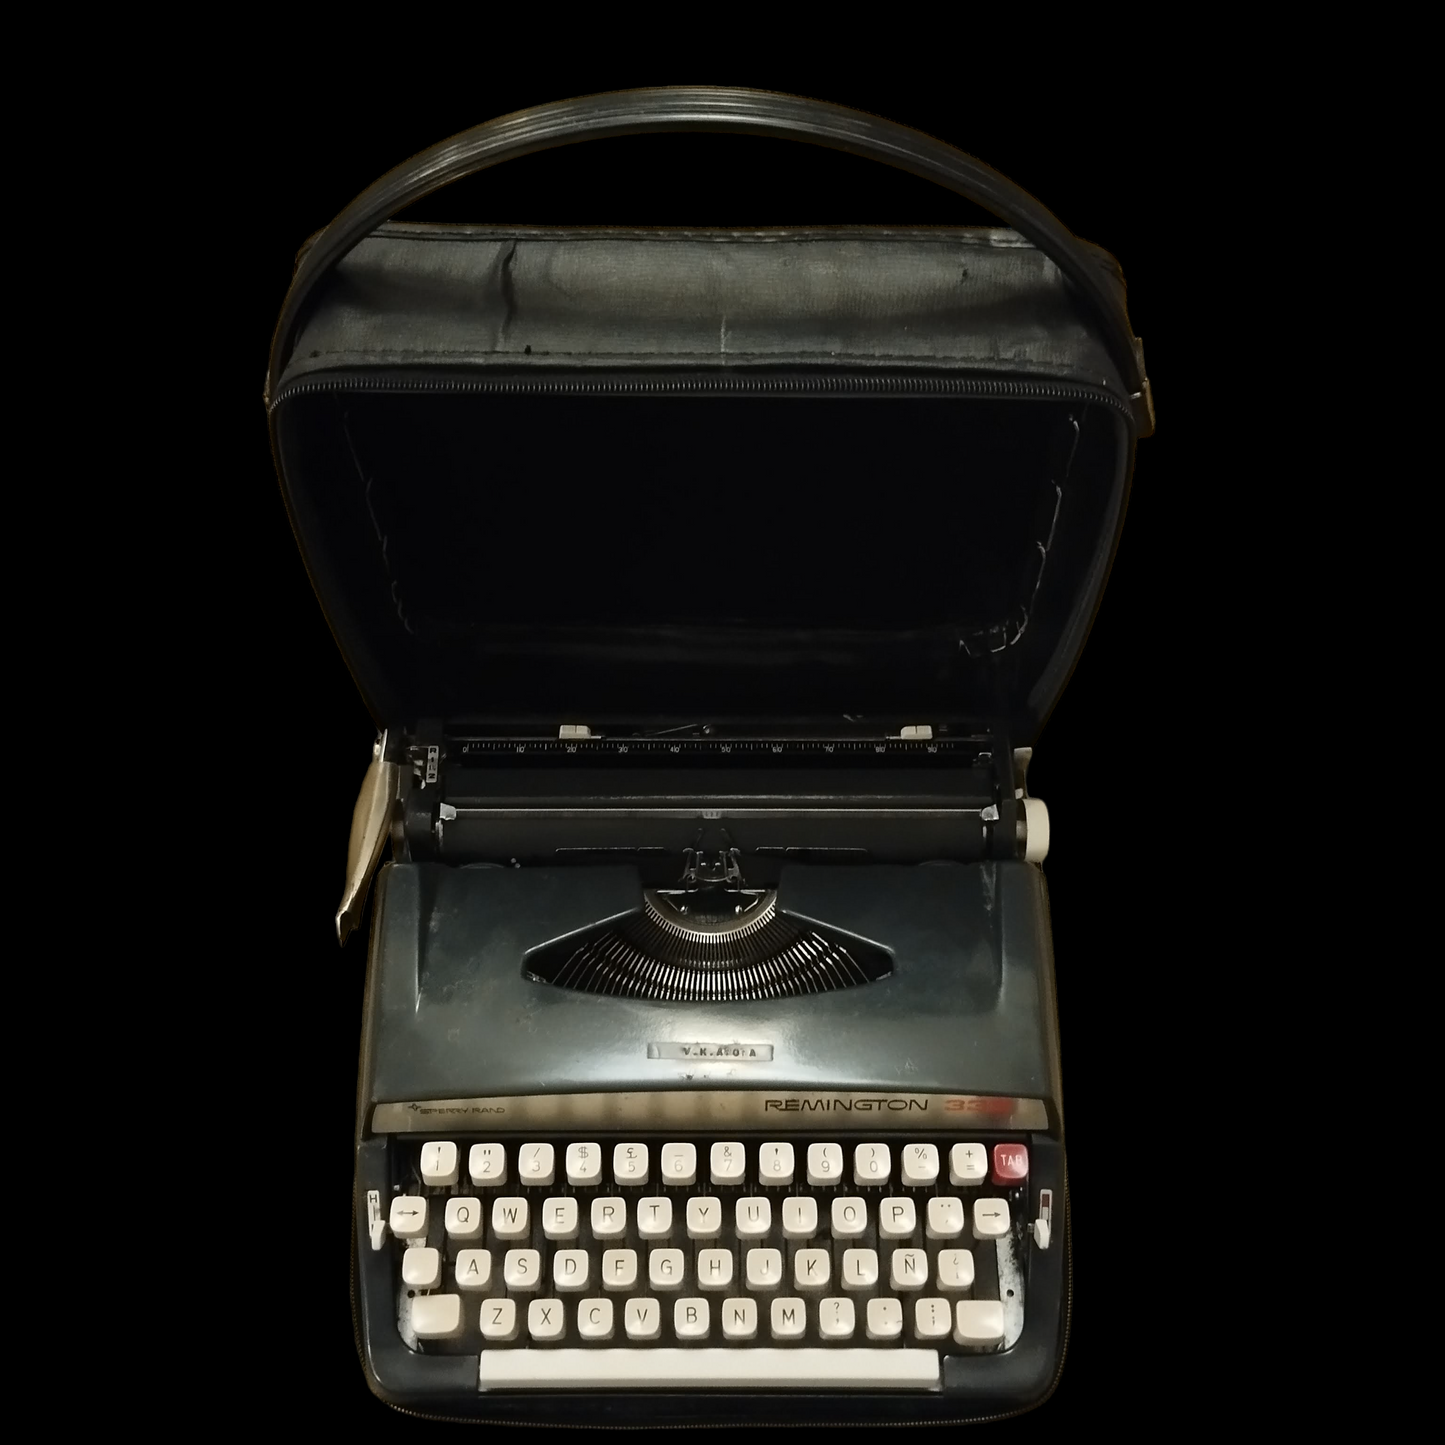 Image of Remington 333 Typewriter. Available from universaltypewritercompany.in